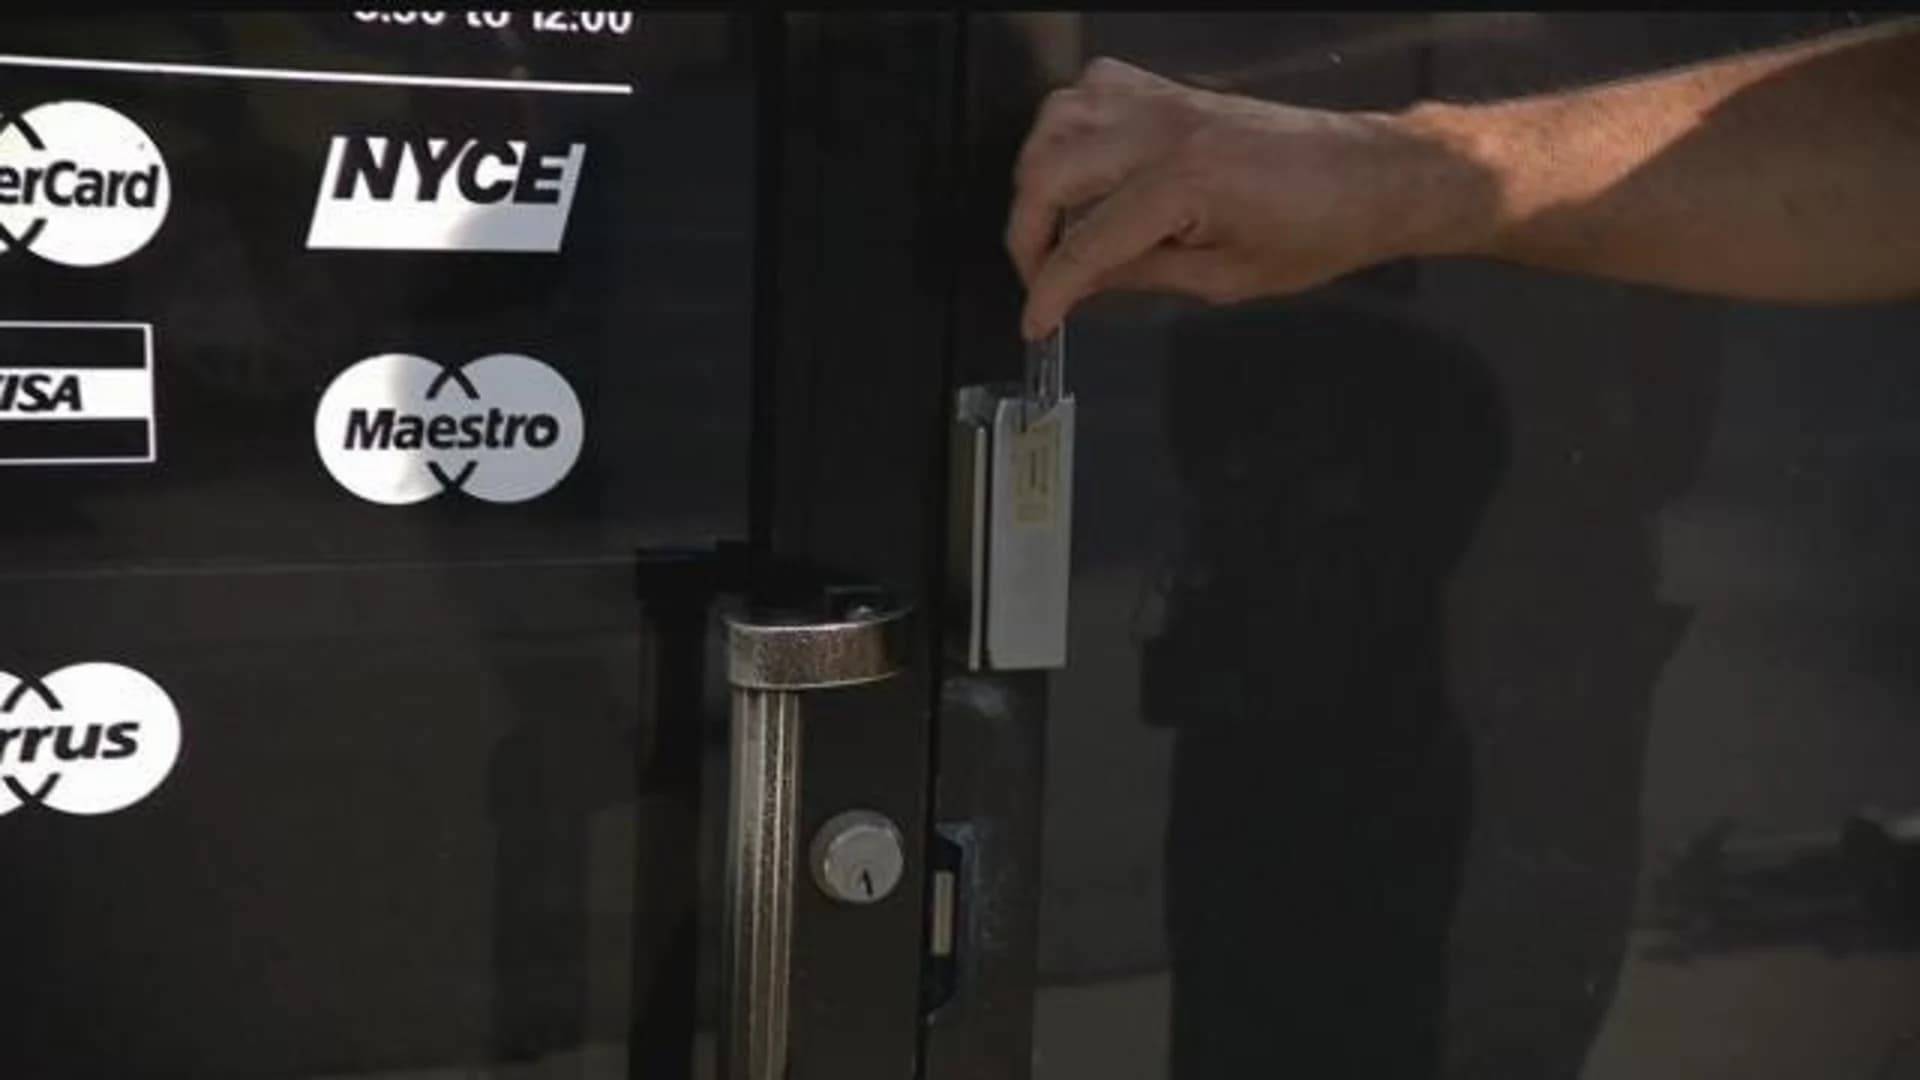 Fairfield PD: Ring of scammers hit banks with skimming devices